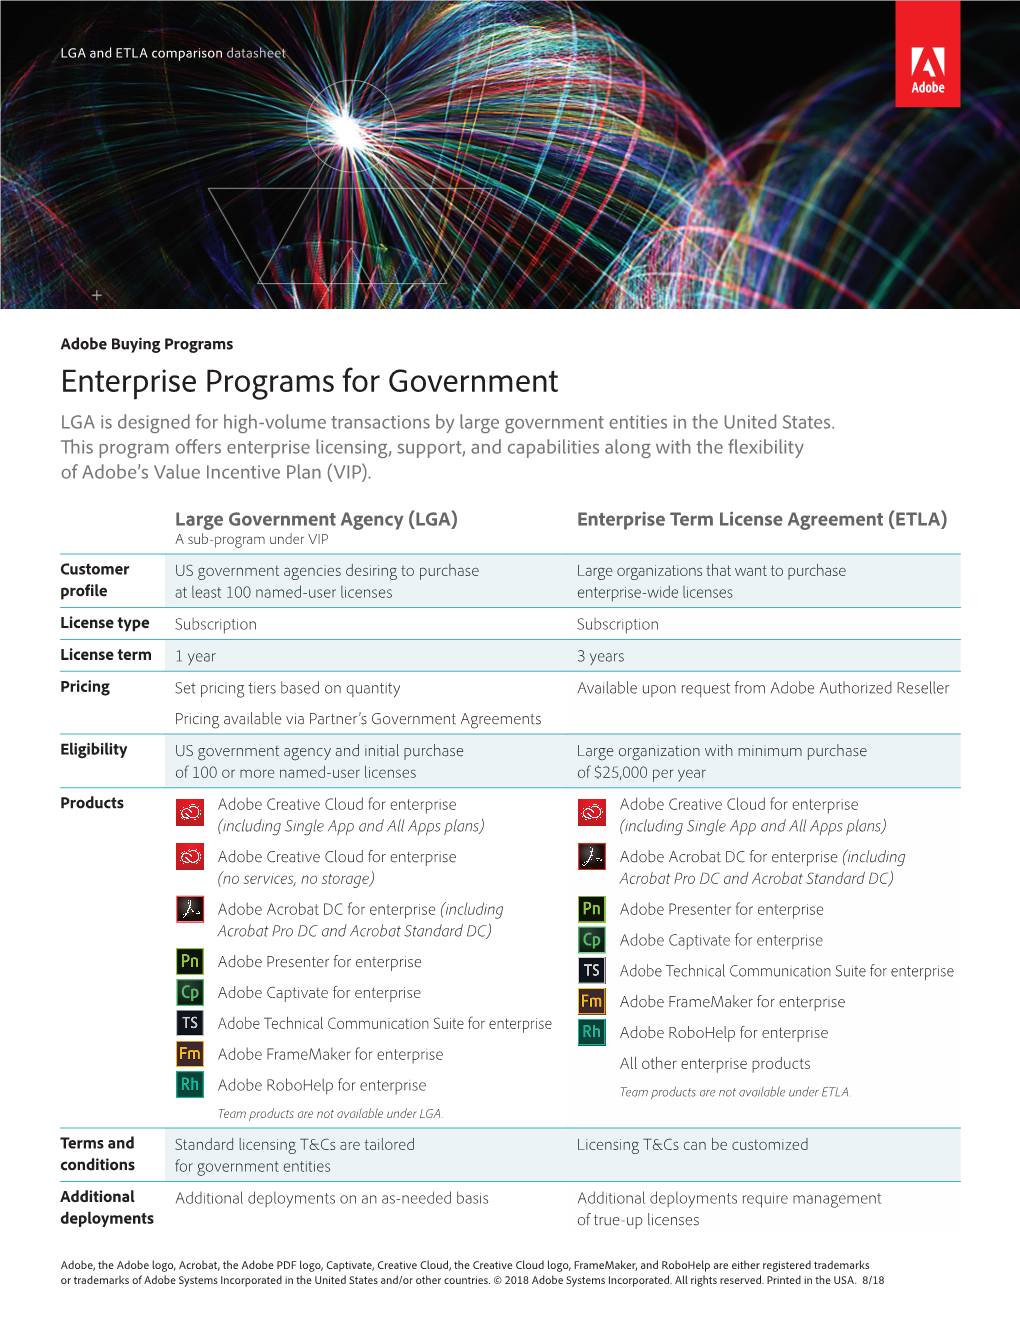 Enterprise Programs for Government LGA Is Designed for High-Volume Transactions by Large Government Entities in the United States